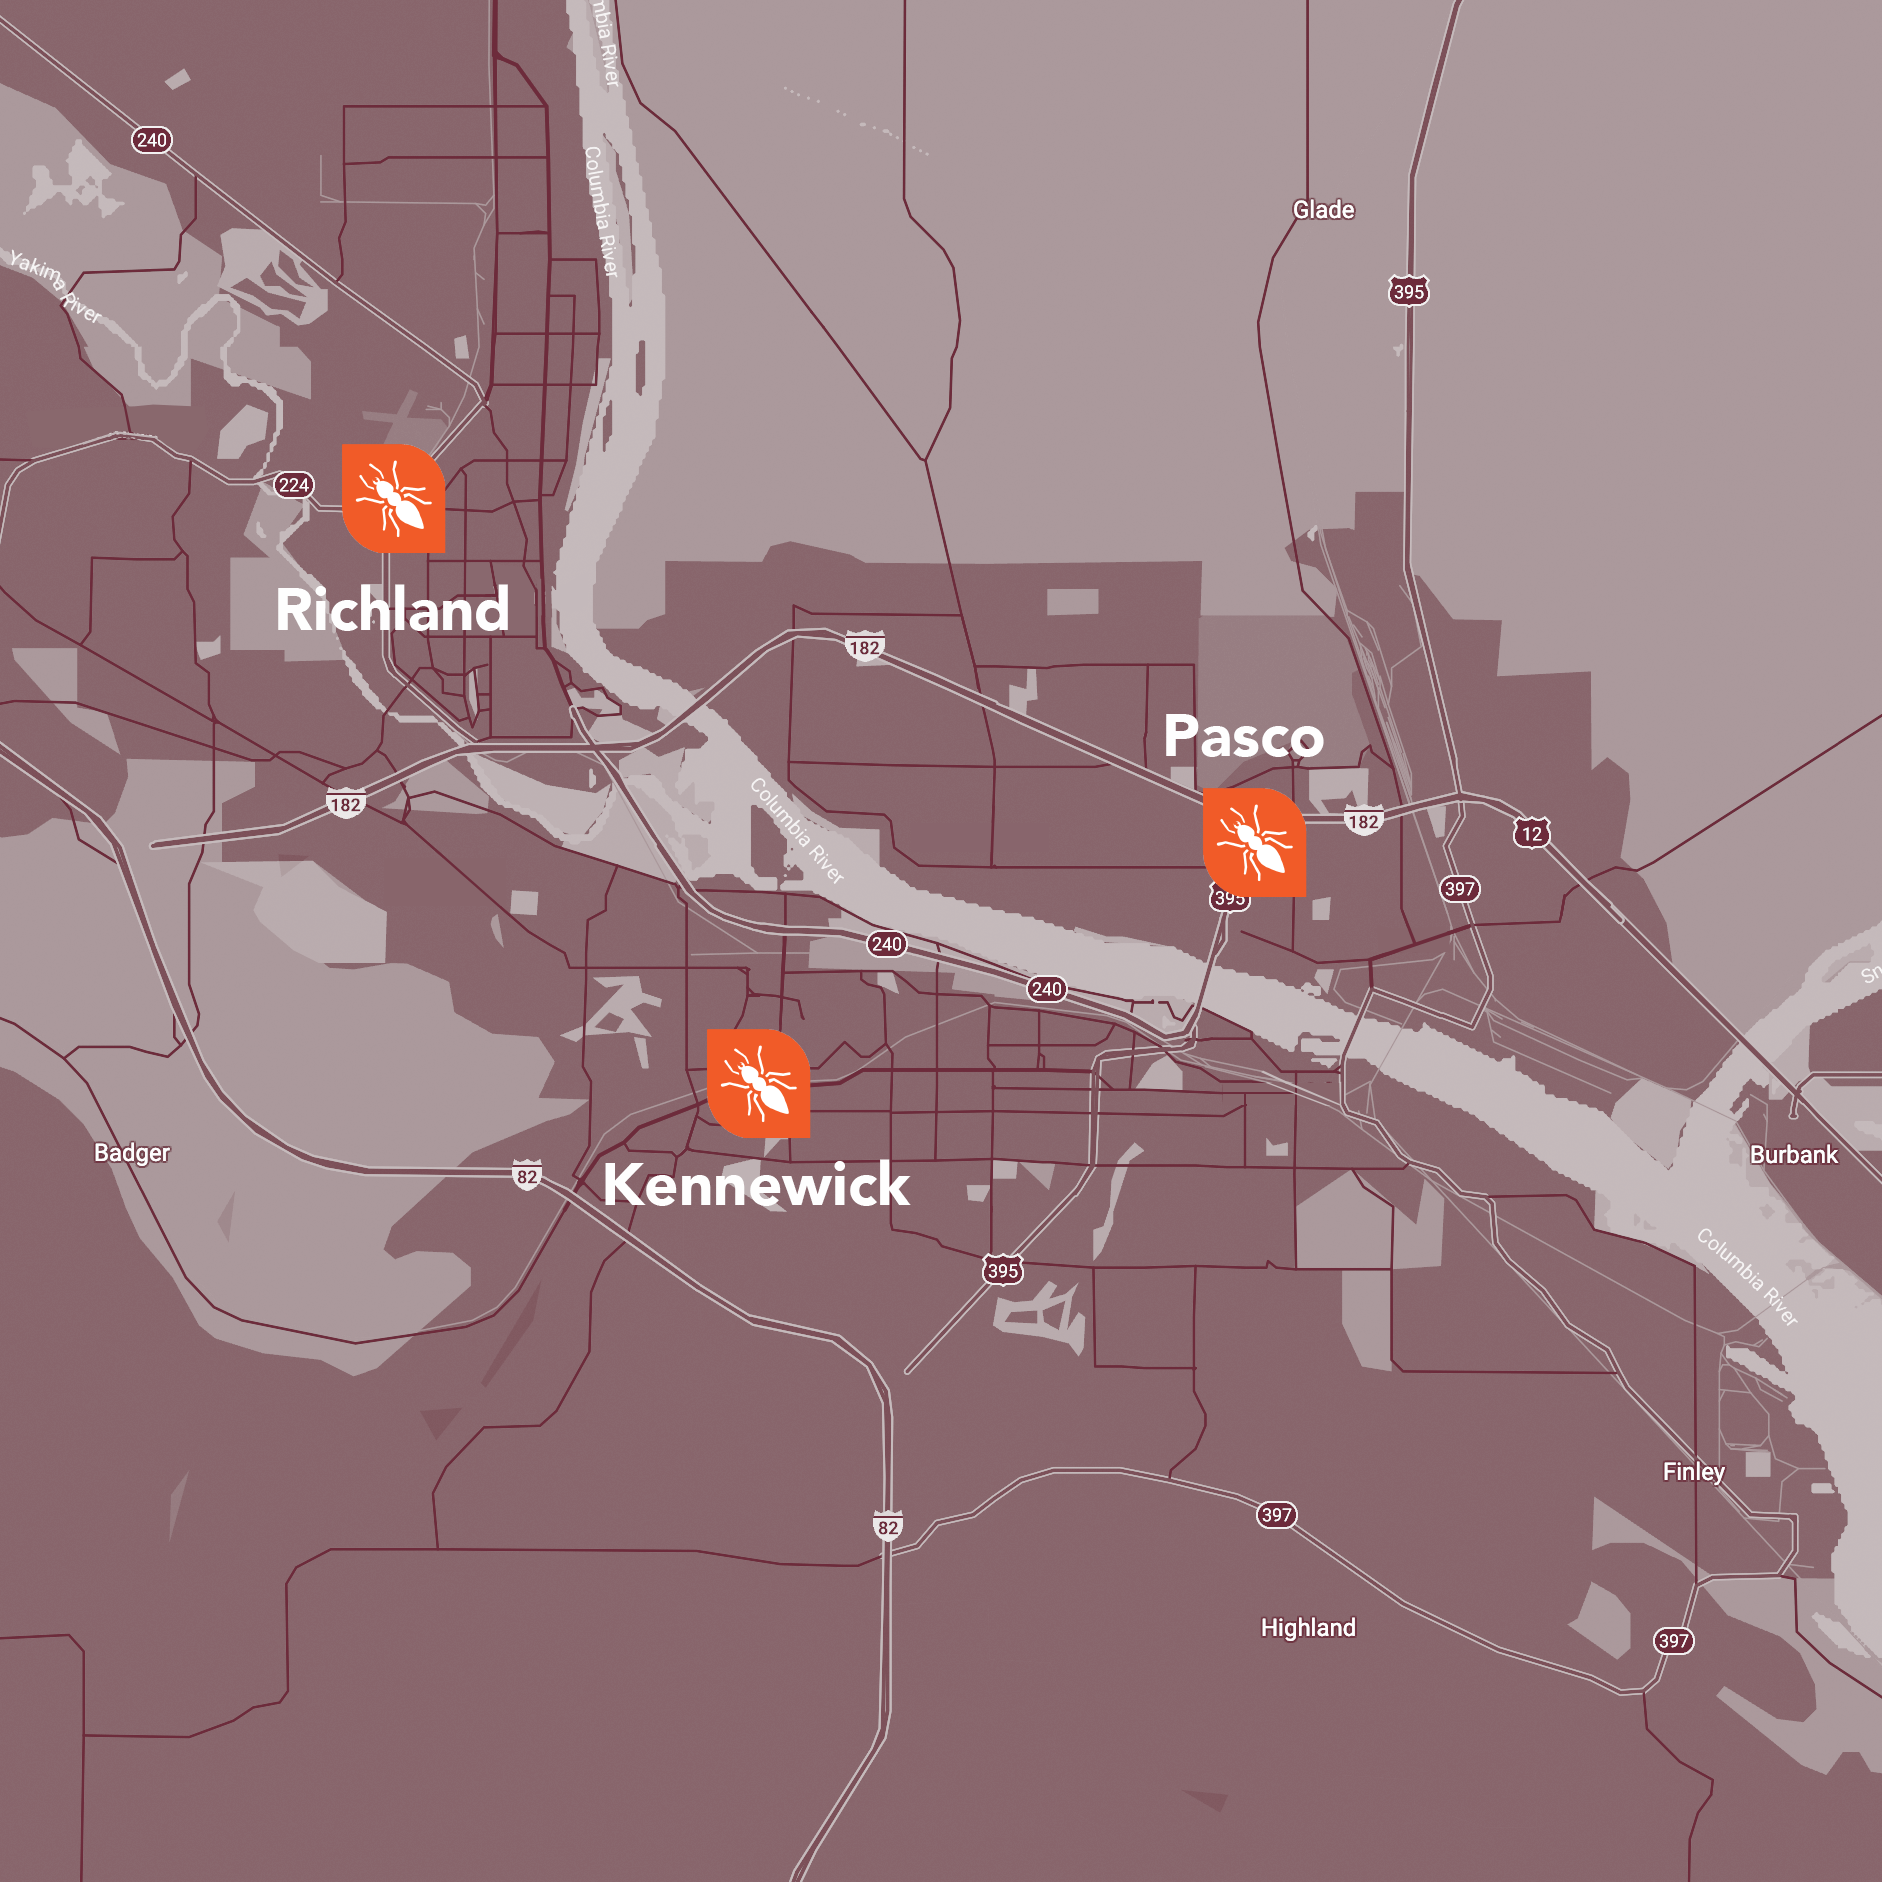 A map showing the location of richland pasco and kennewick